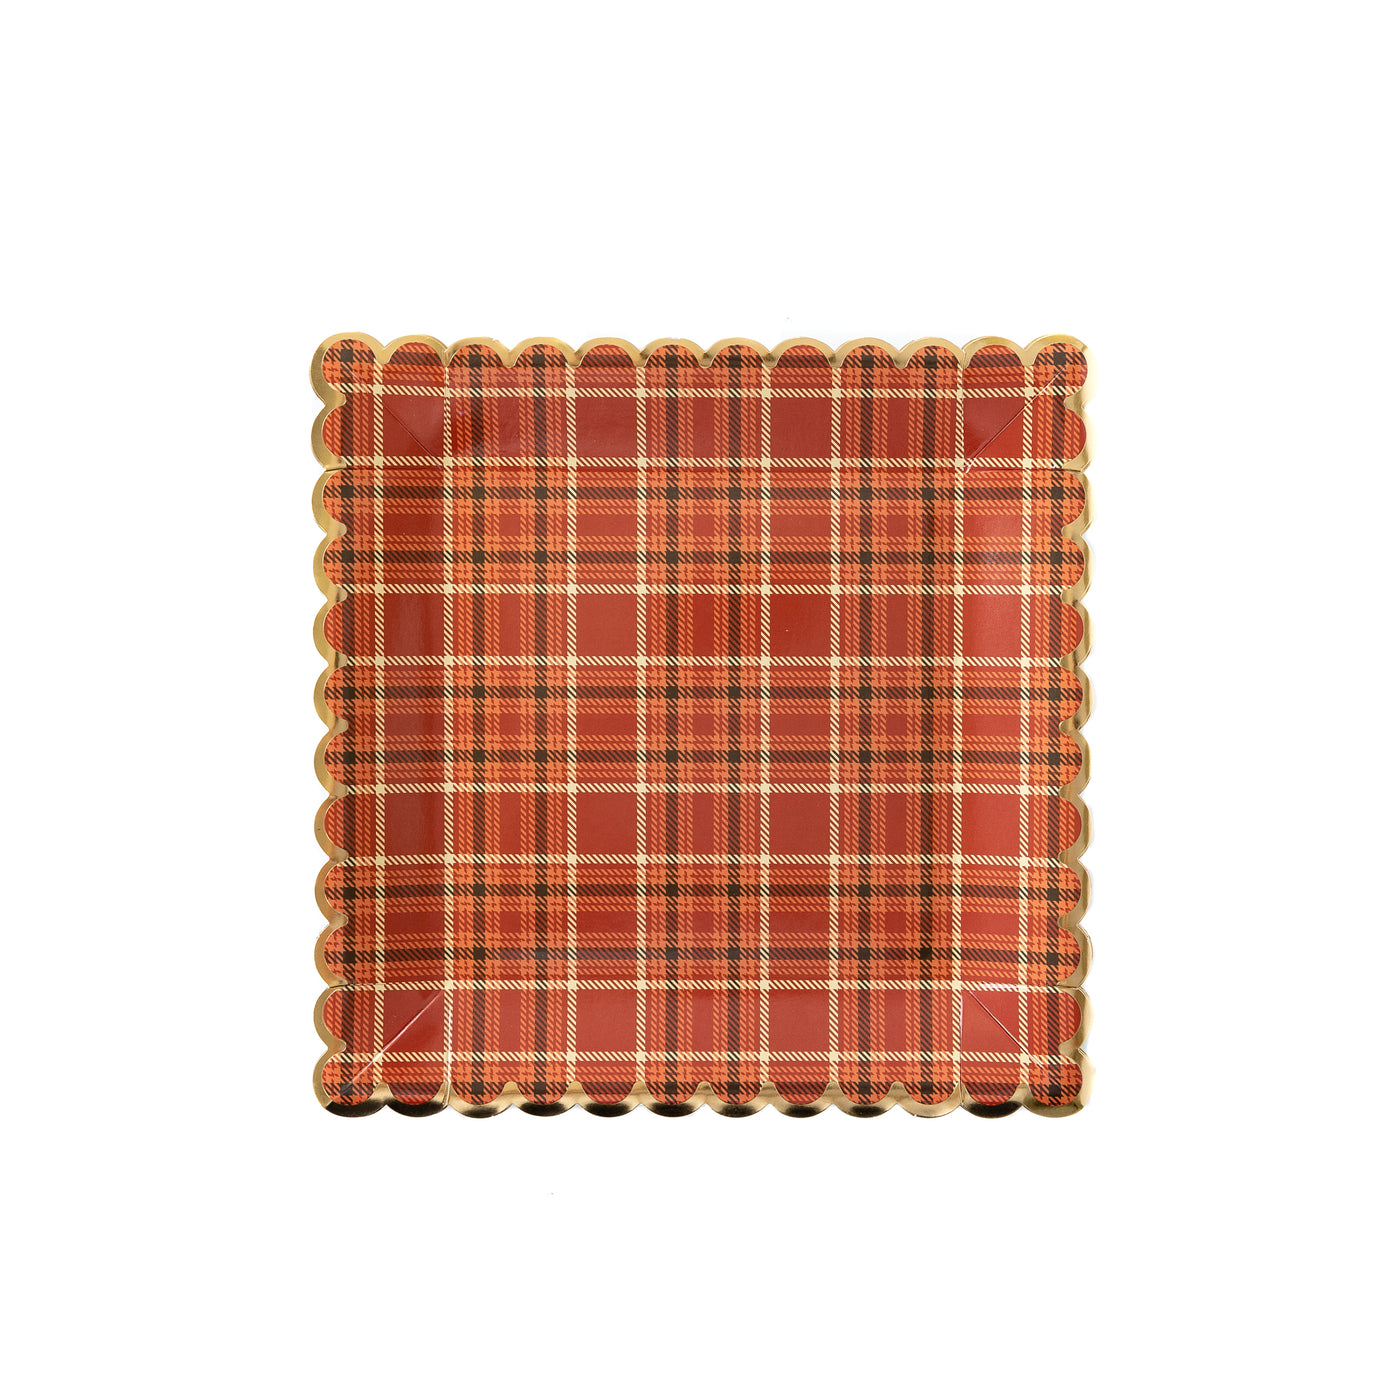 THP852 - Harvest Plaid 9" Scalloped Plate